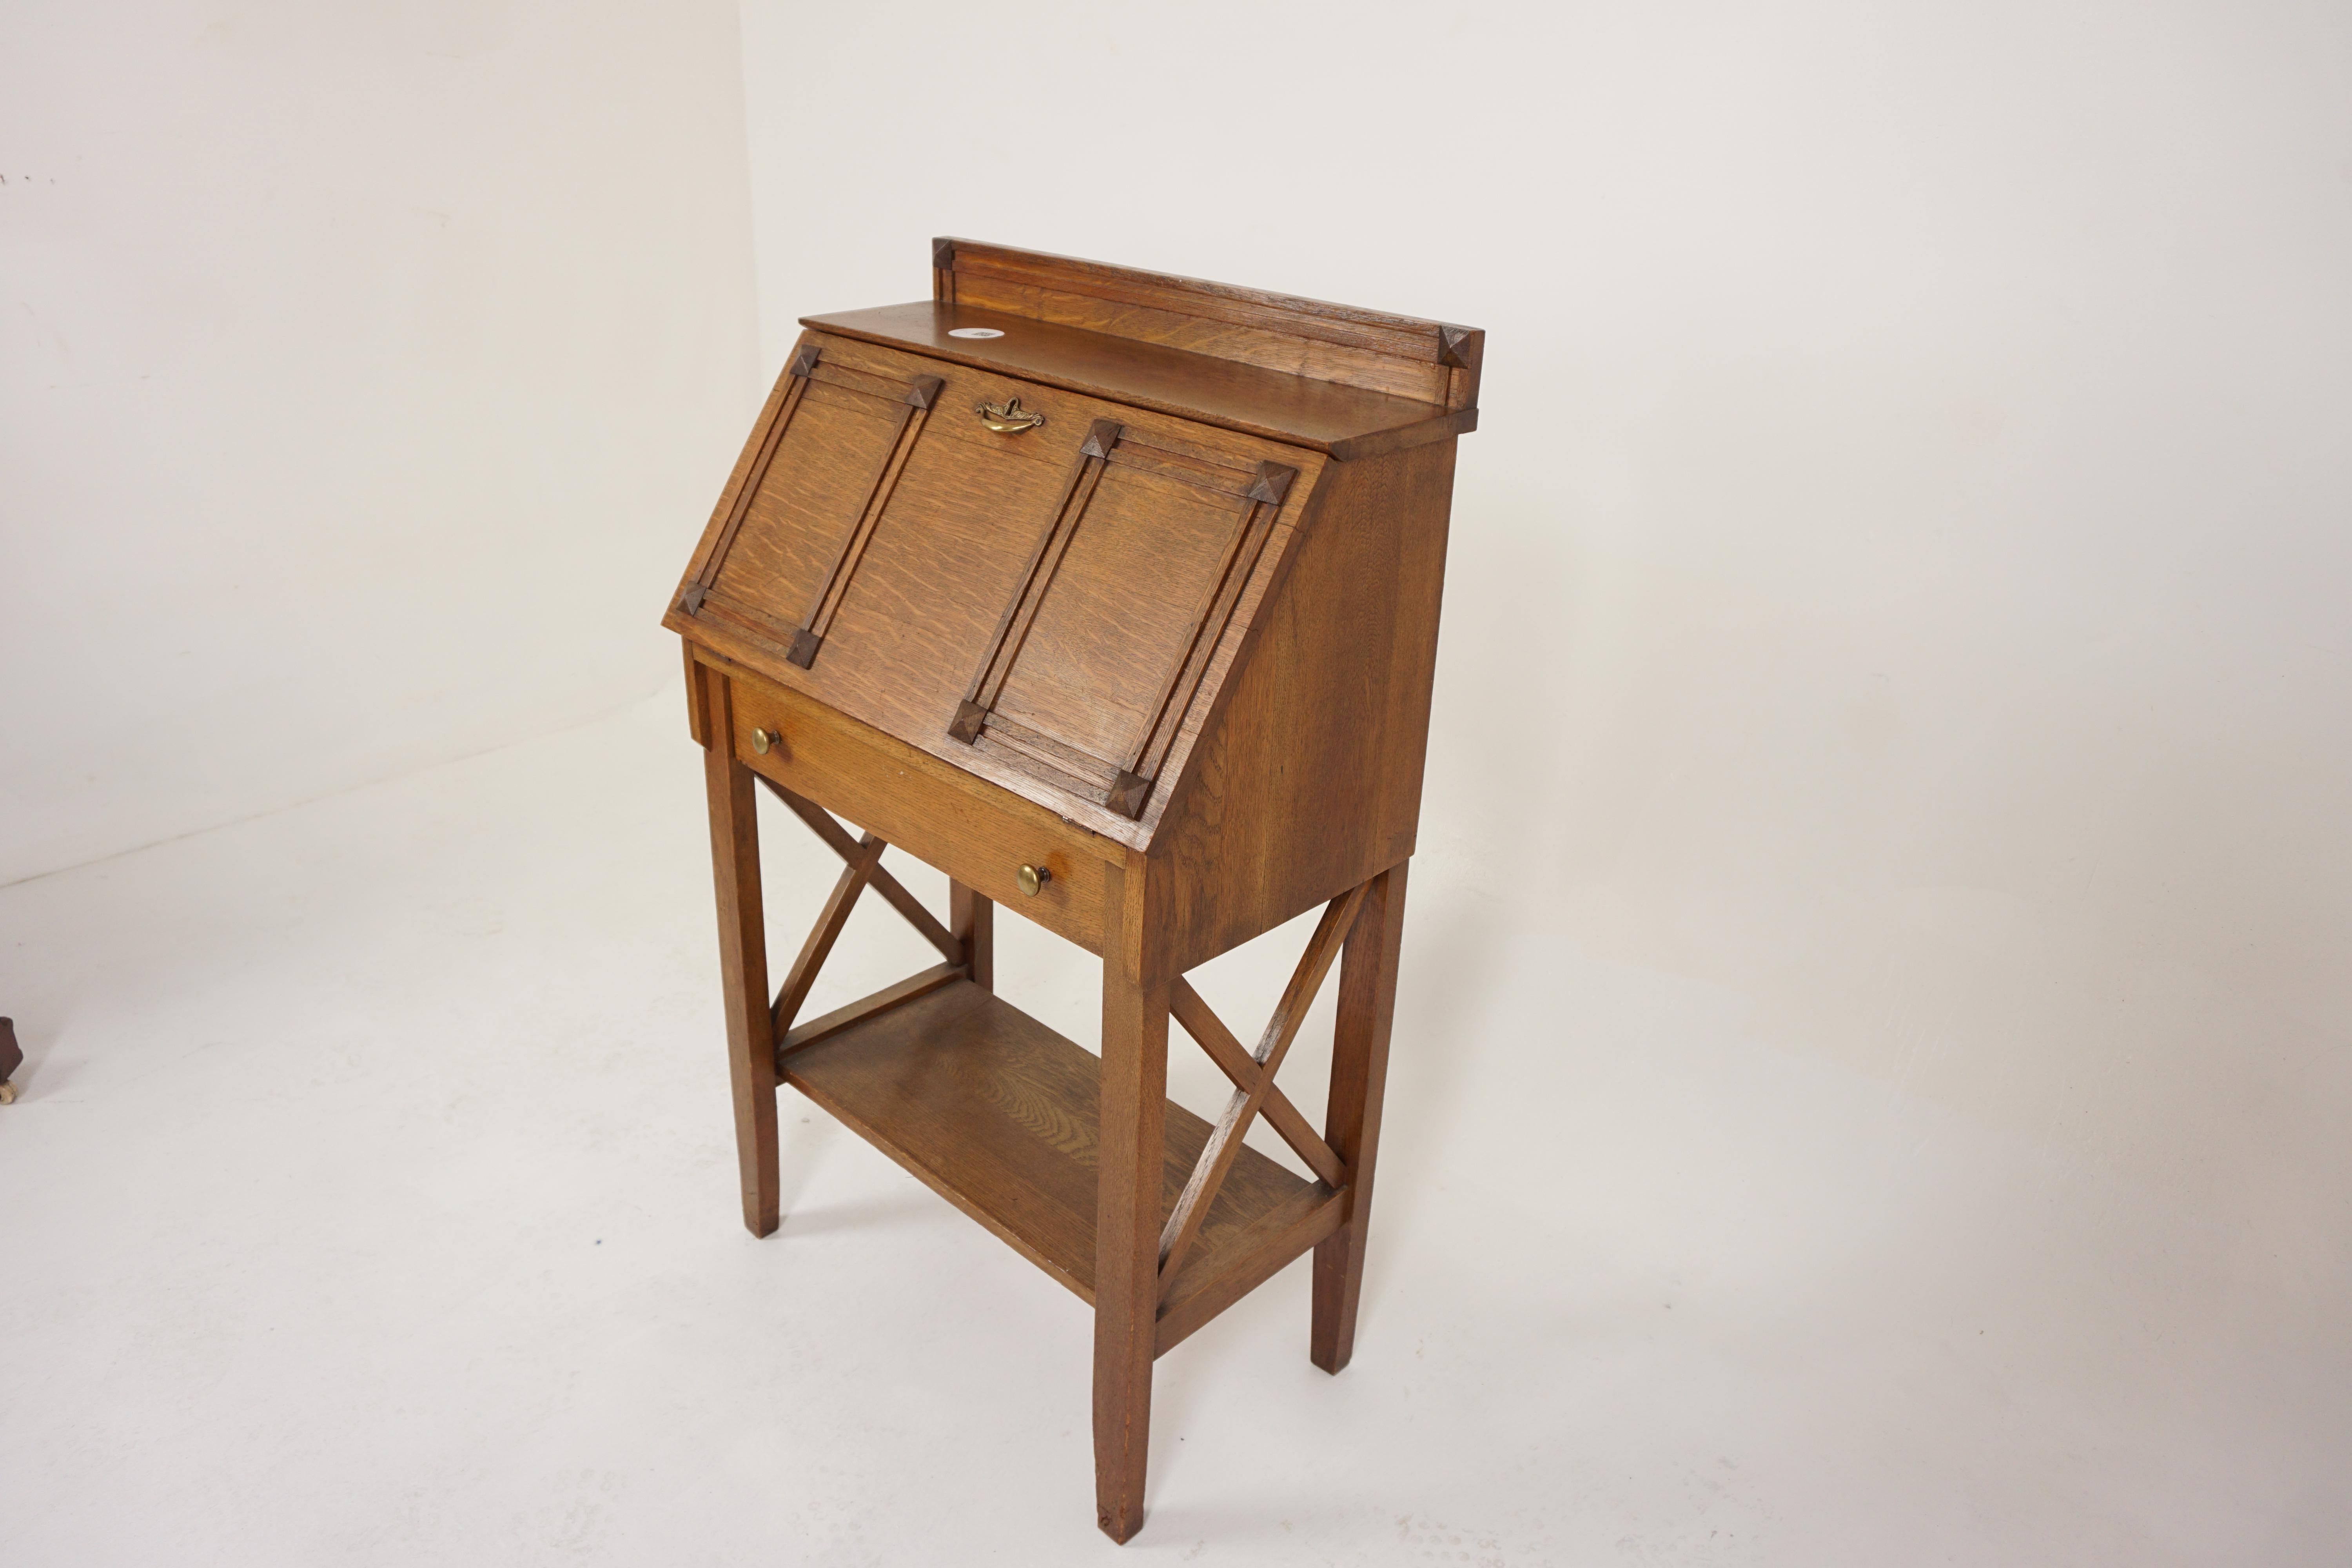 Arts and Crafts Mission Tiger Oak Drop Front Secretaire Desk, American 1910, H885

$950
American 1910
Solid Tiger Oak
Original finish
Small gallery back
Slant front with raised moulding and original brass pull
Opens to reveal large writing